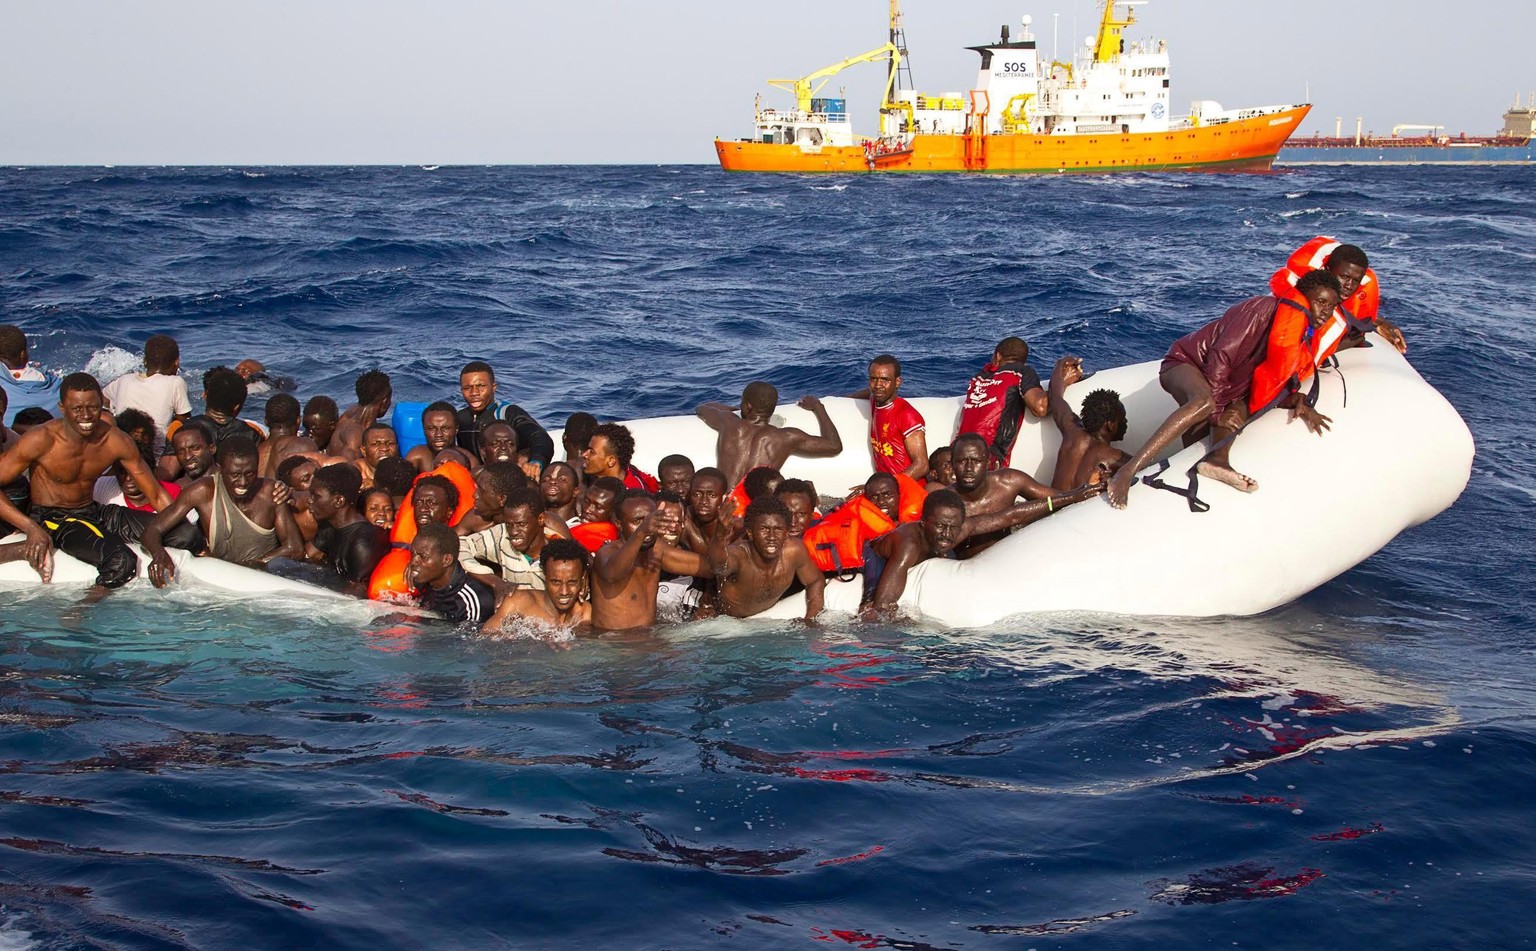 epa05265406 A handout photgraph made available by the Ong Sos Méditerranée showing migrants on a snking inflatable boat before being rescued by the Aquarius ship of the humanitarian group SOS Mediterr ...